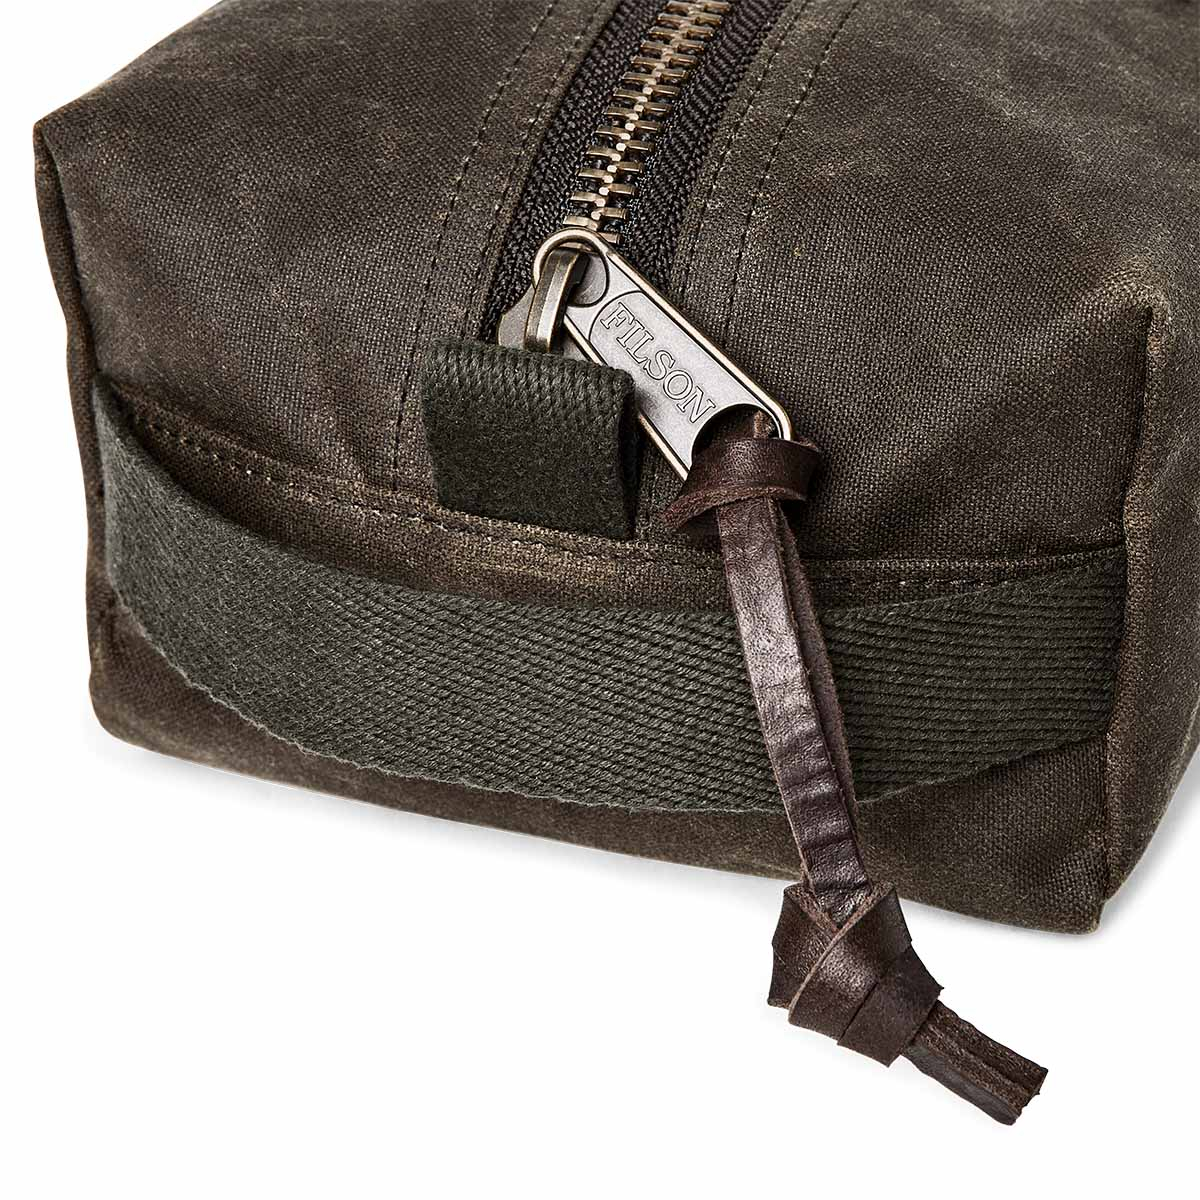 Filson Tin Cloth Travel Kit Otter Green, a compact, light, and tough dopp kit made with heritage materials and modern design